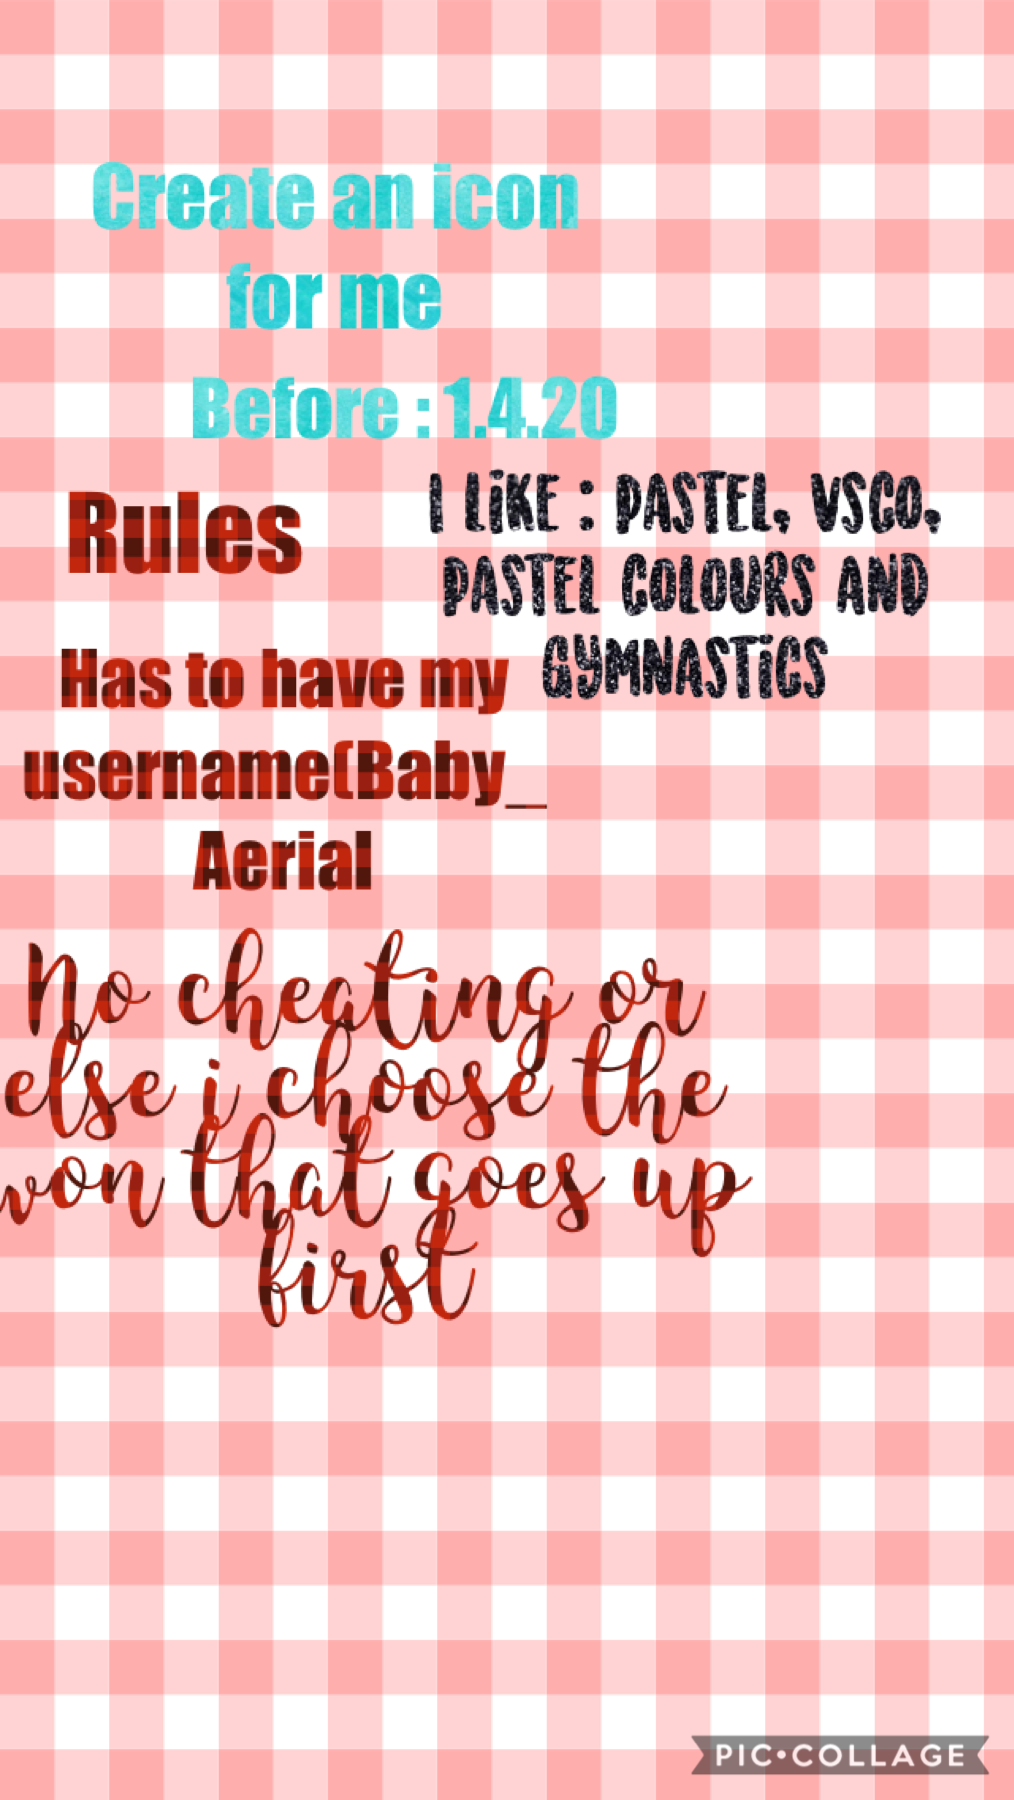 Best before: 1/4/20 please no cheating and make it very very very cool💖